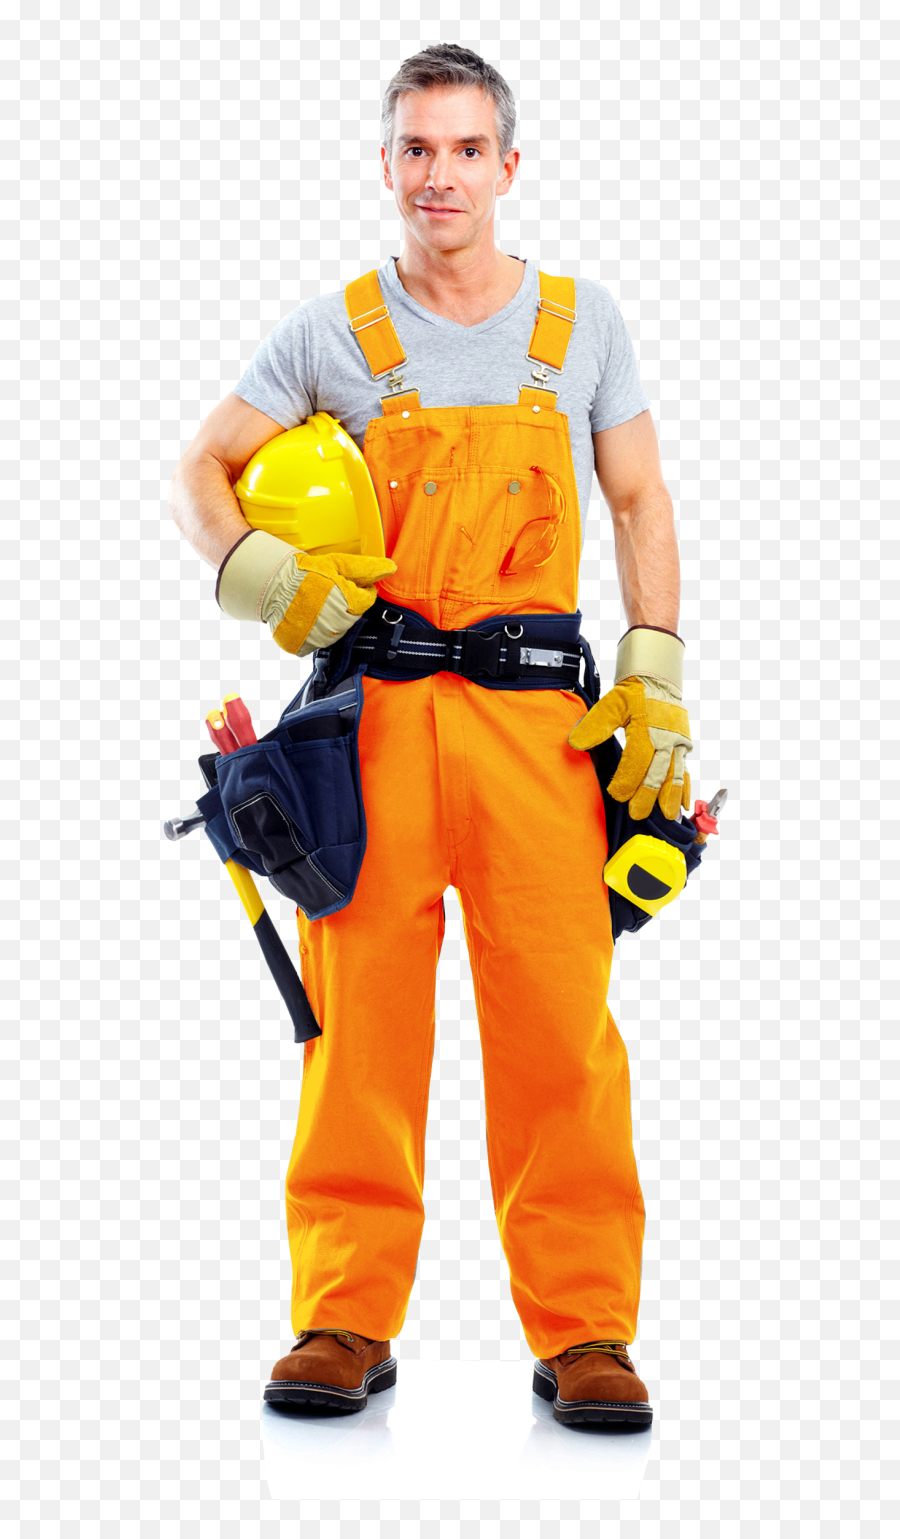 Download Industrail Worker Png Image For Free - Contractor Png,Construction Worker Png